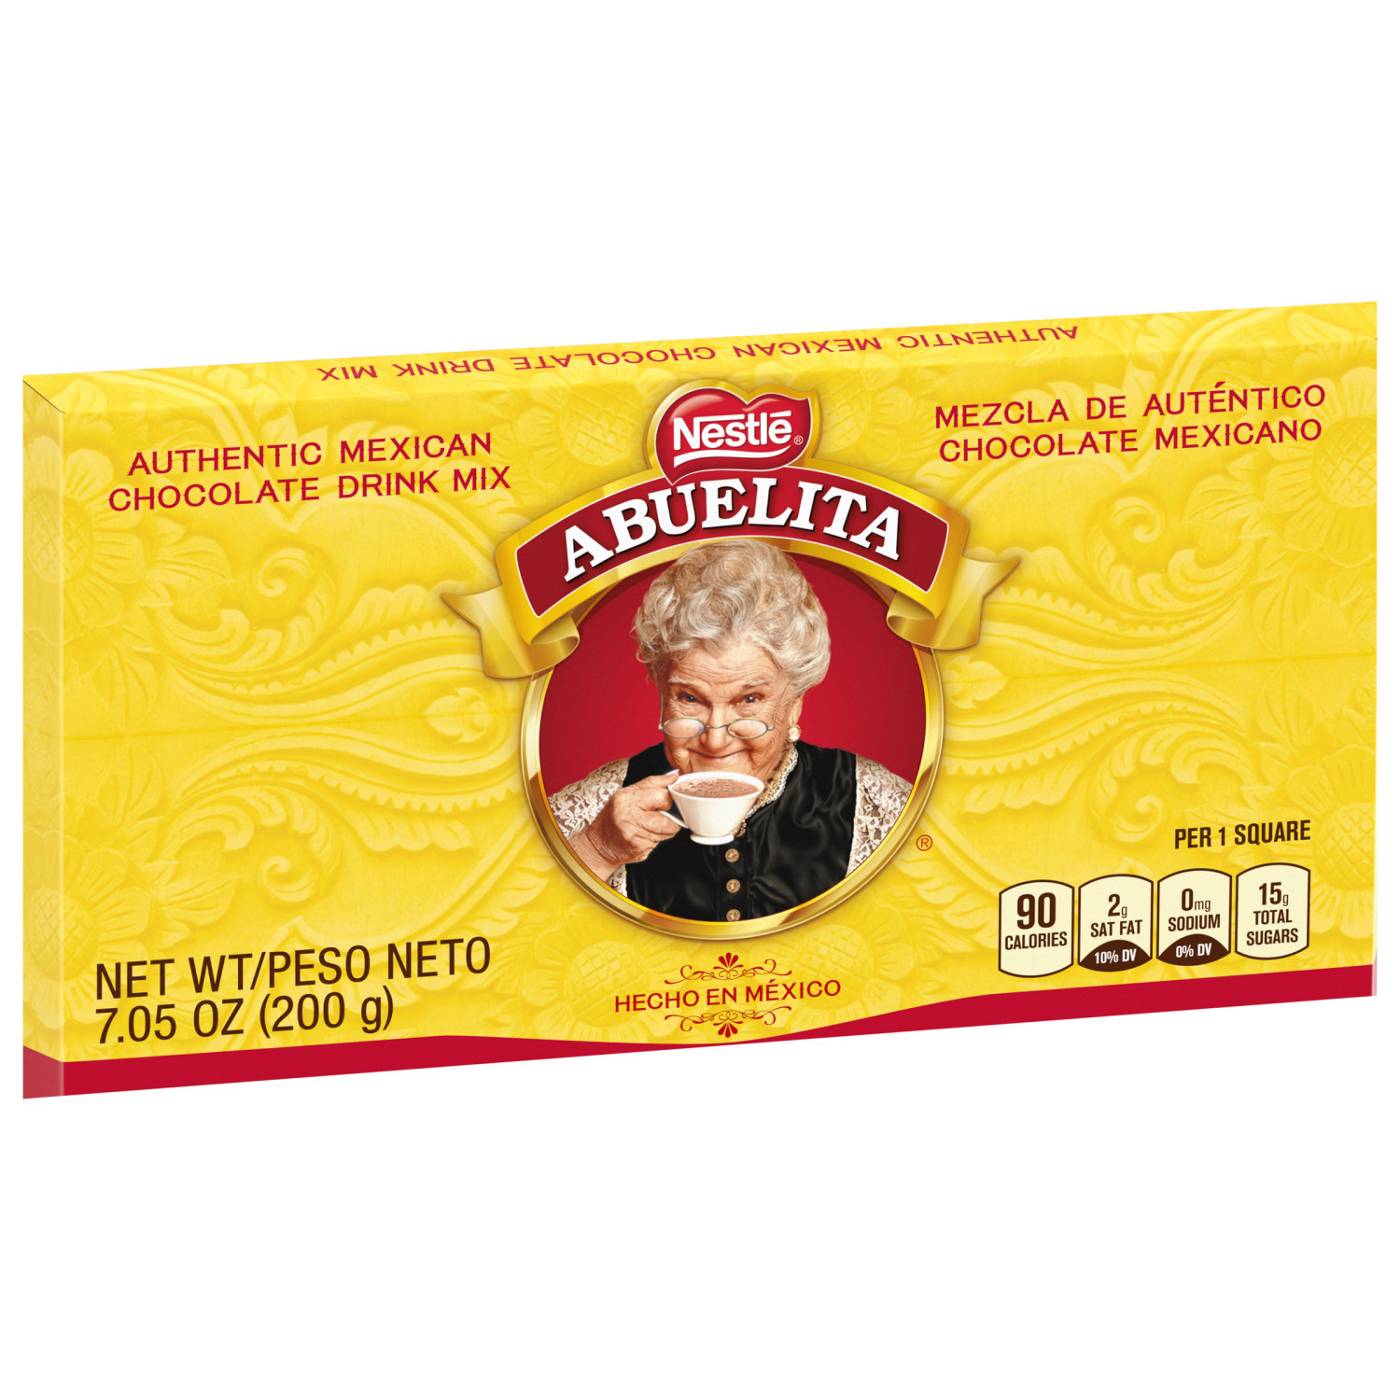 Nestle Abuelita Authentic Mexican Hot Chocolate Drink Mix Bar; image 6 of 7